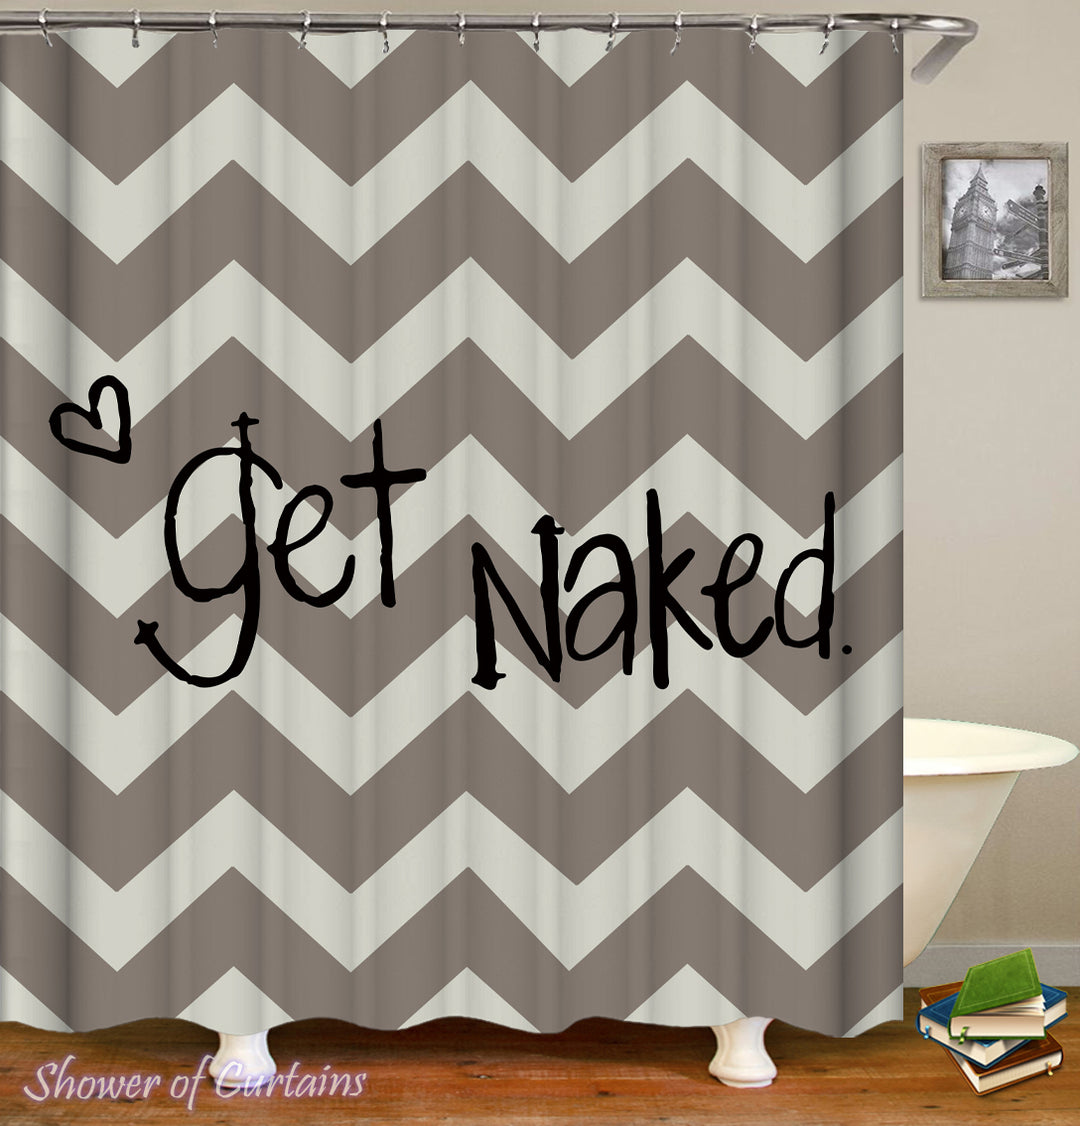 Funny Shower Curtains - Get Naked Caption